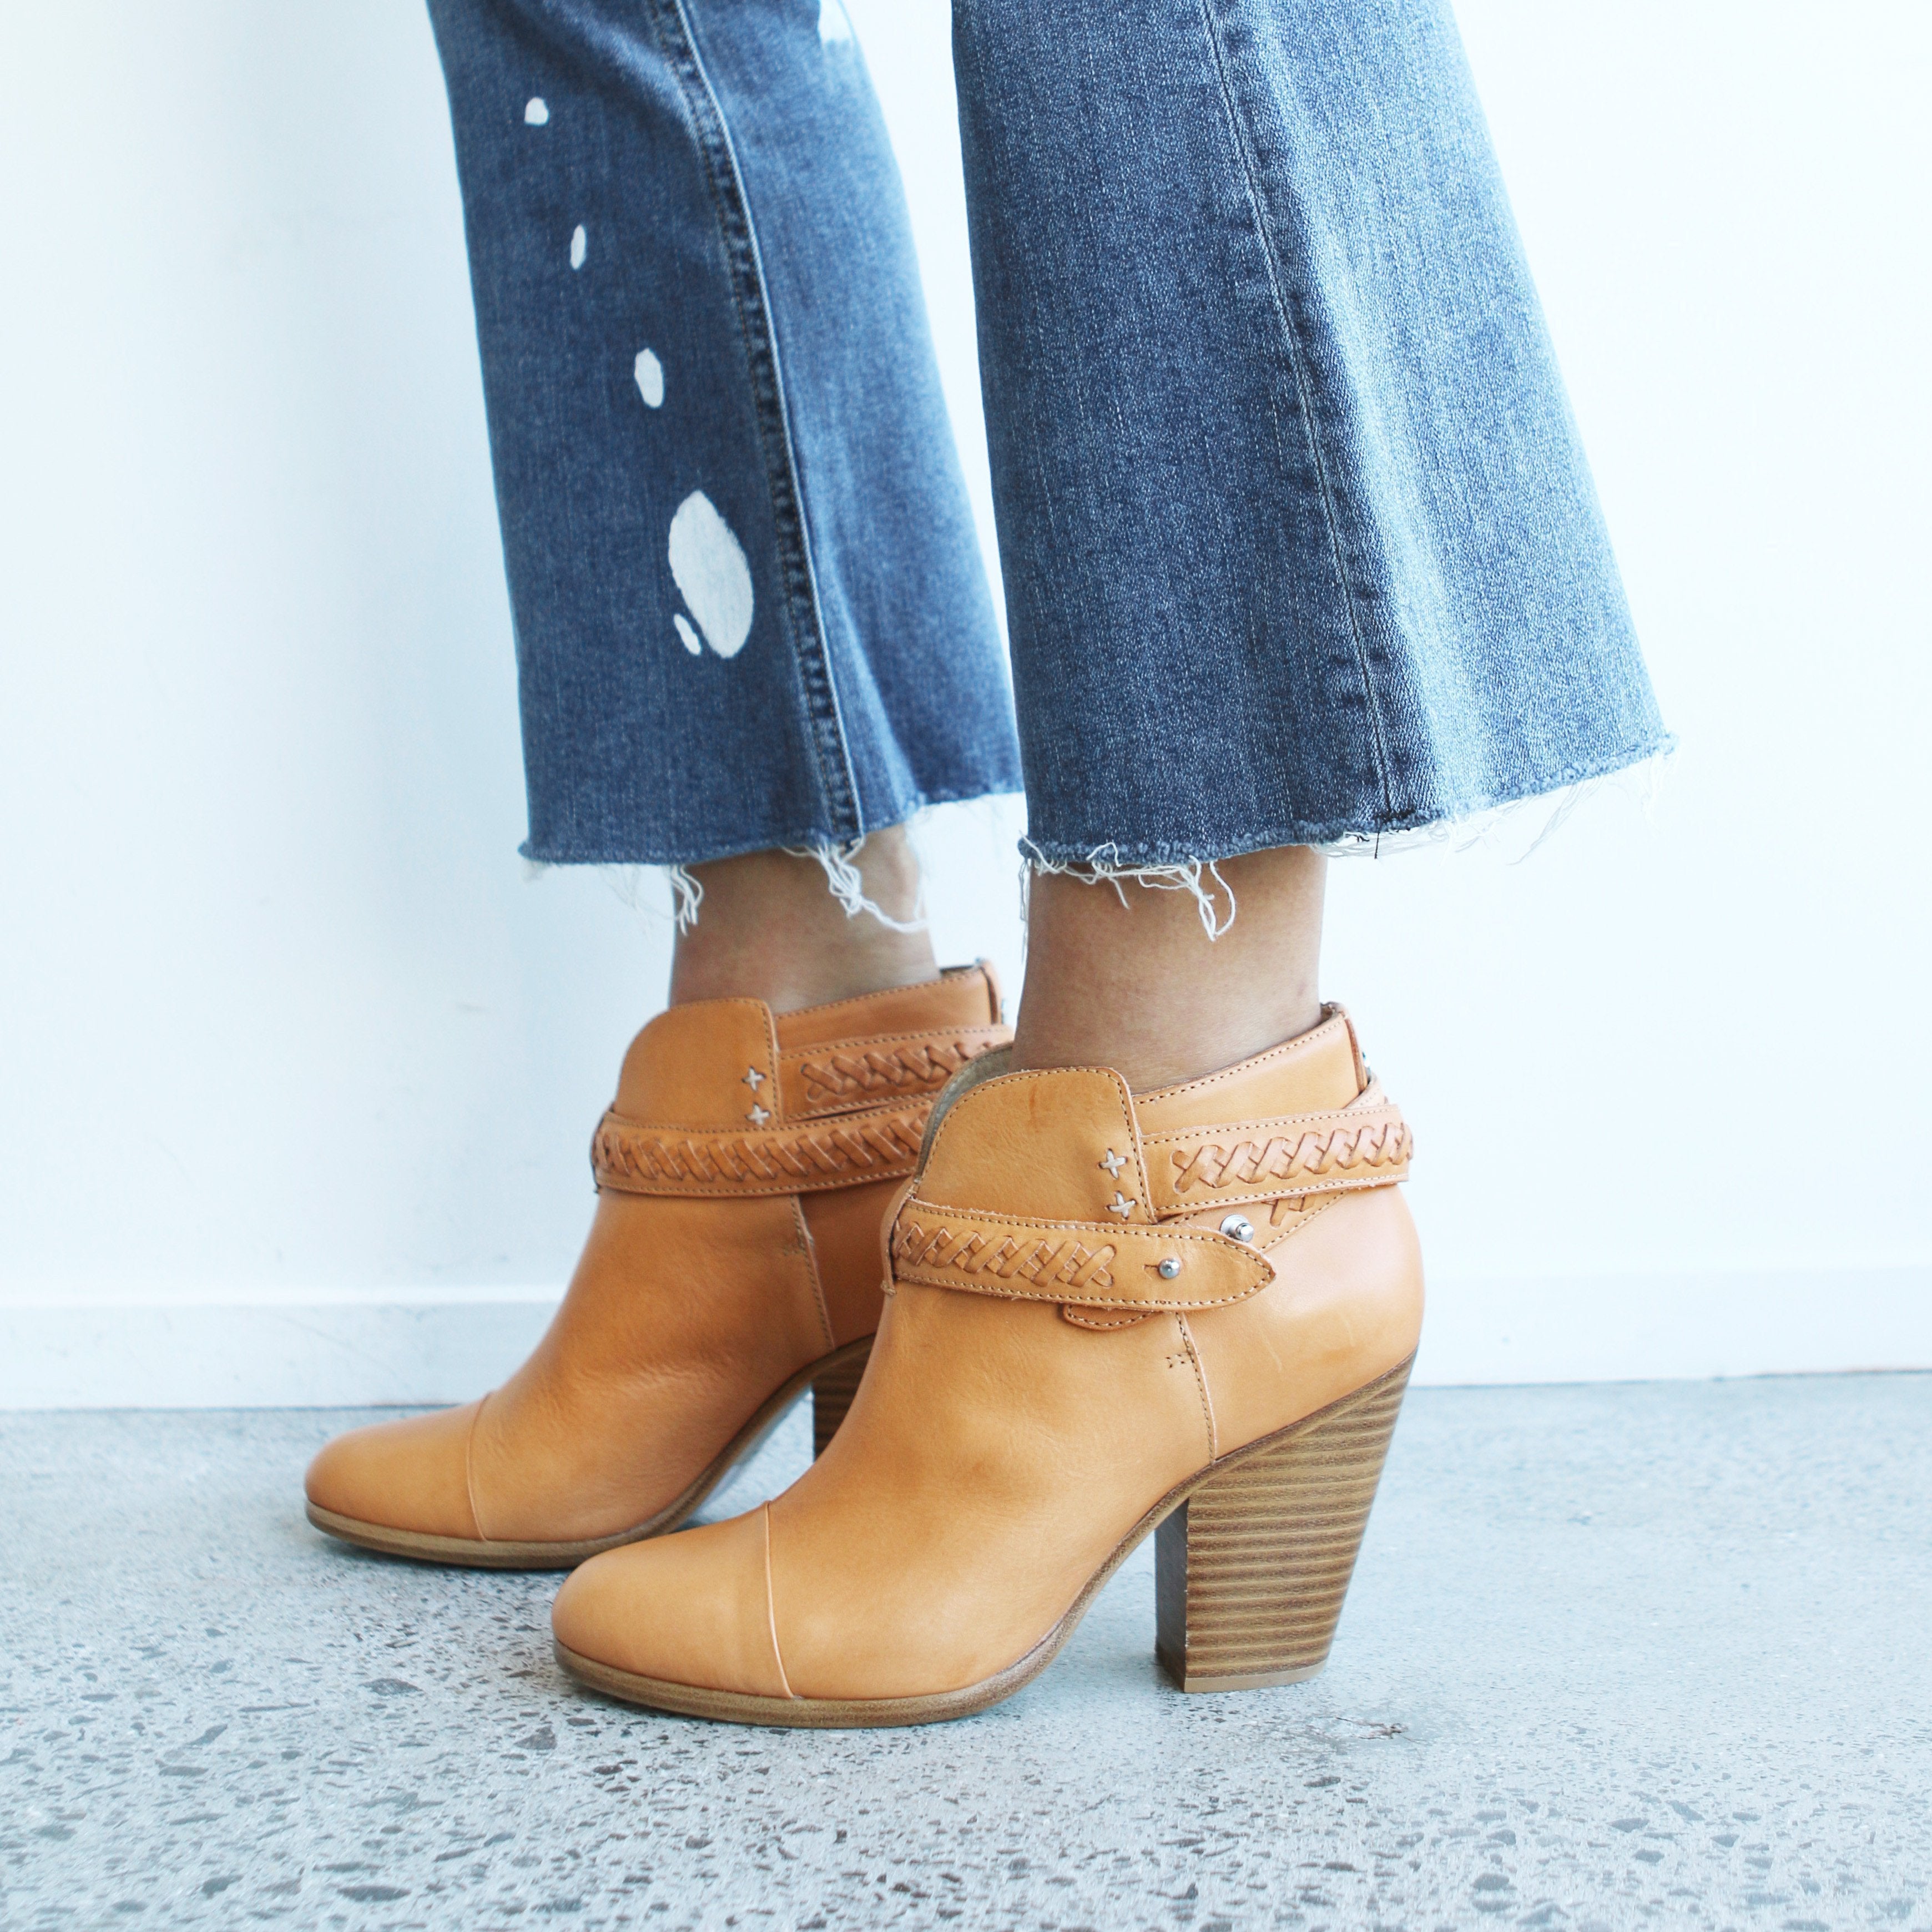 Five ways to work the ankle boot